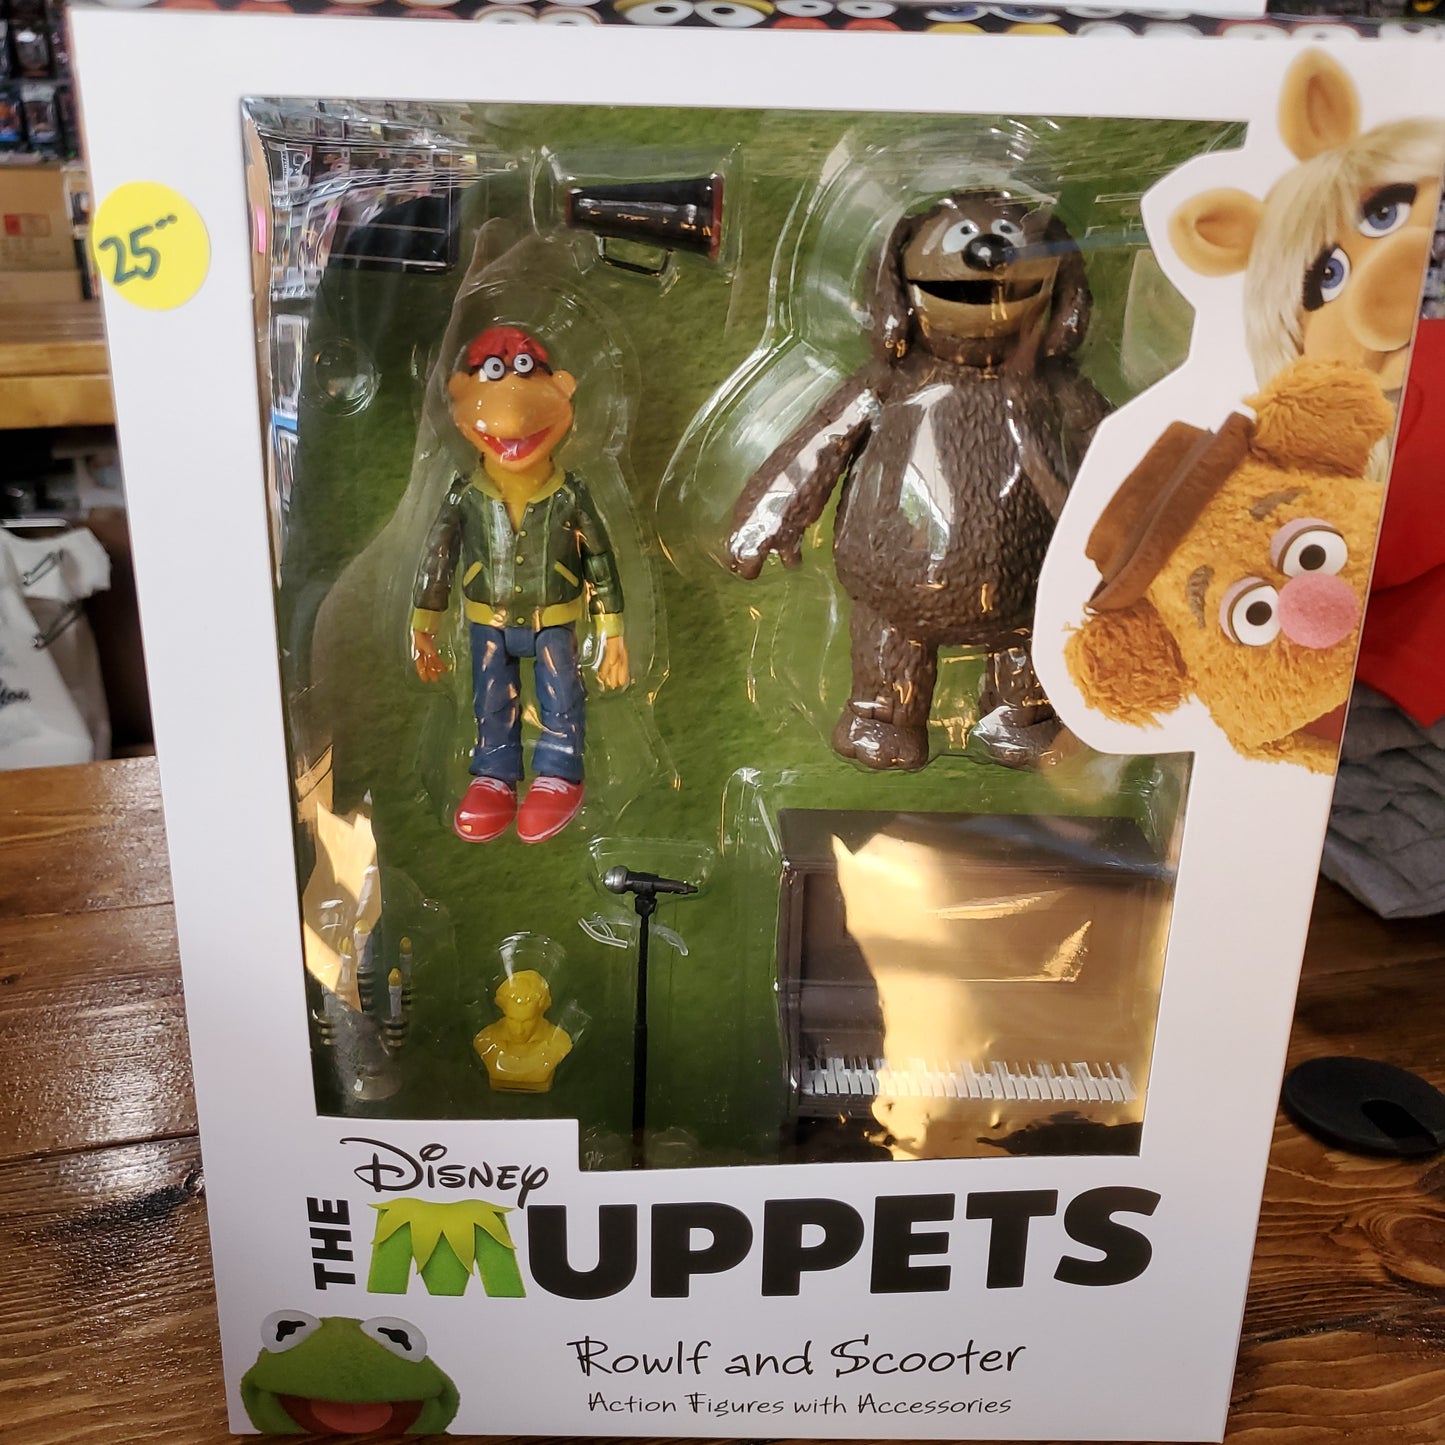 The Muppets Rowlf and Scooter figures